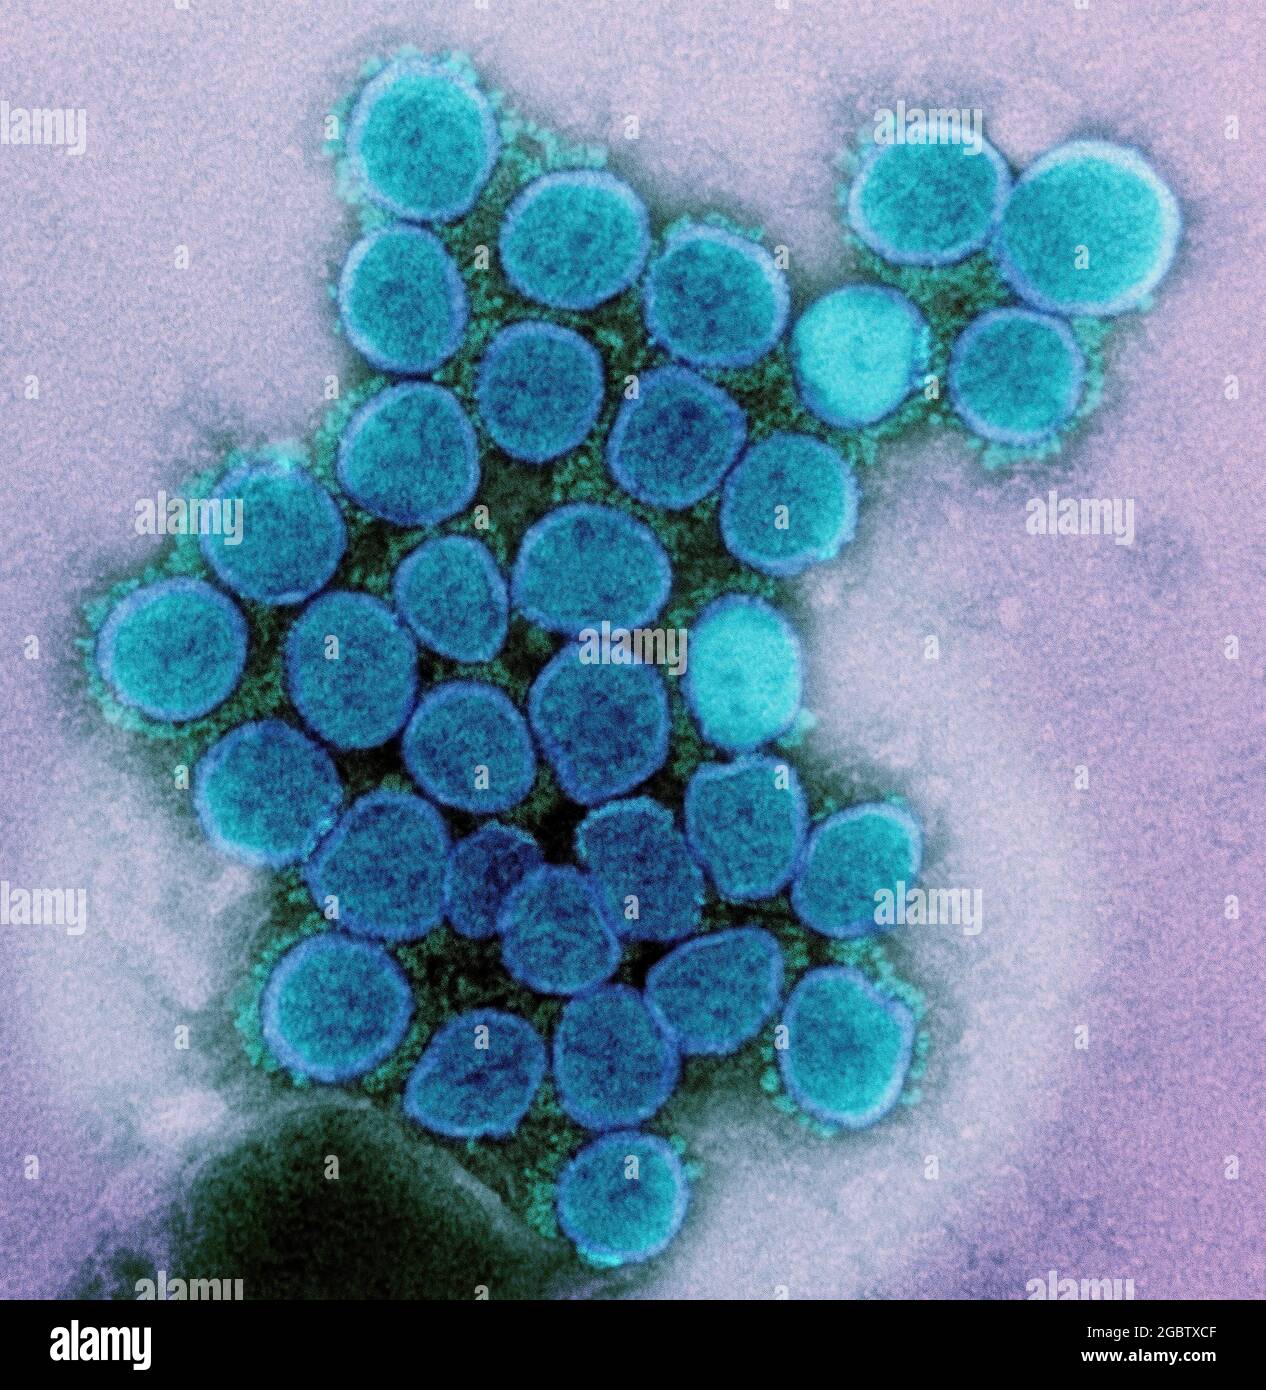 Transmission electron micrograph of a variant strain of SARS-CoV-2 virus particles (UK B.1.1.7), isolated from a patient sample and cultivated in cell culture. Image captured at the NIAID Integrated Research Facility (IRF) in Fort Detrick, Maryland. Credit: NIAID Stock Photo